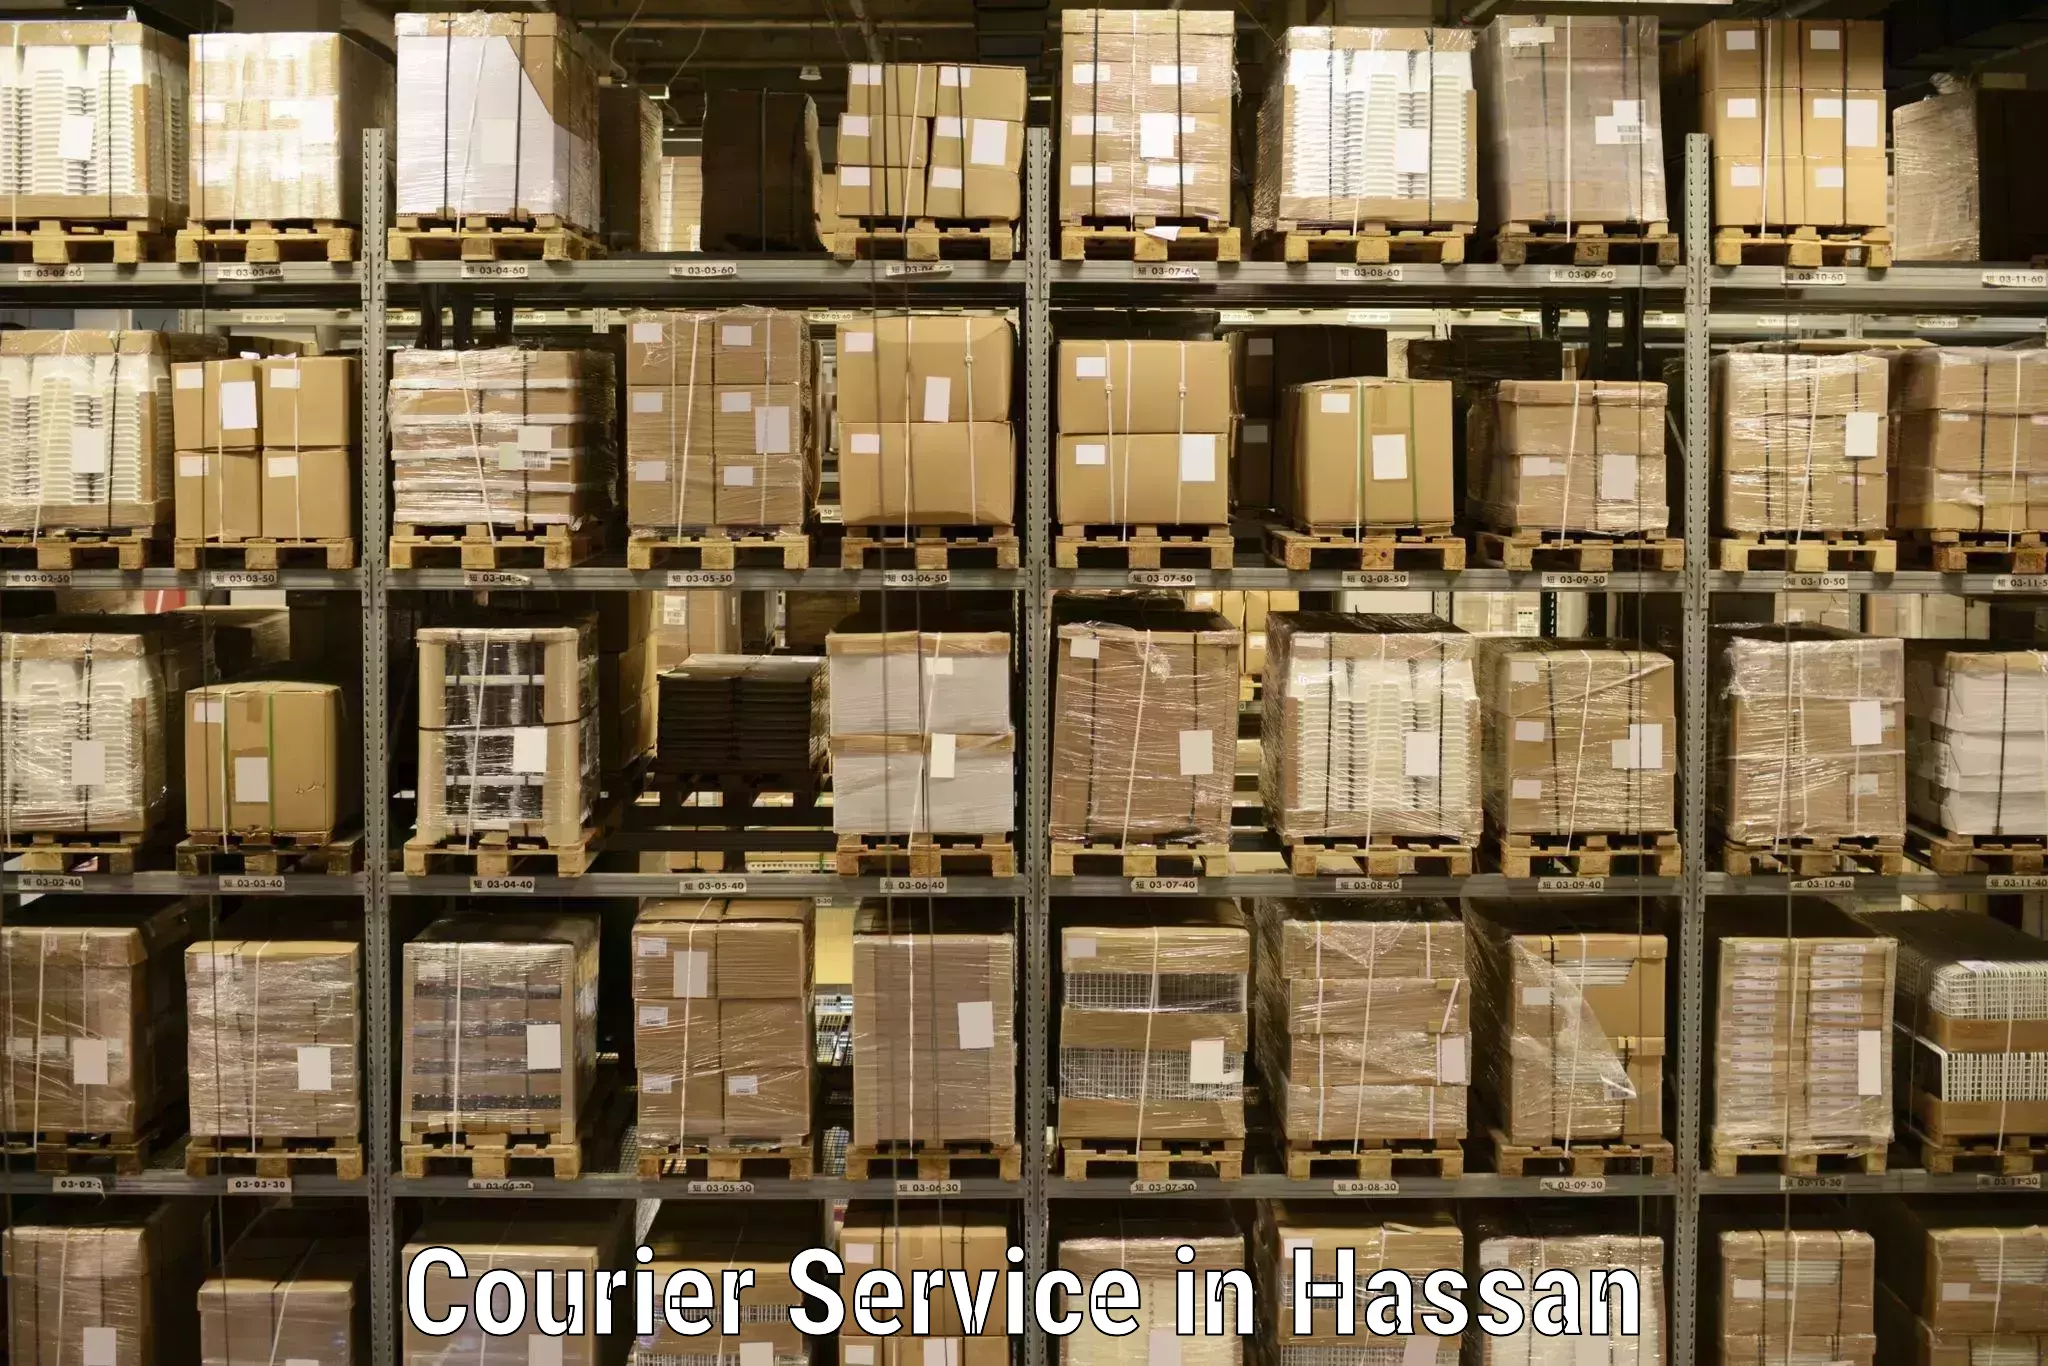 Courier service efficiency in Hassan